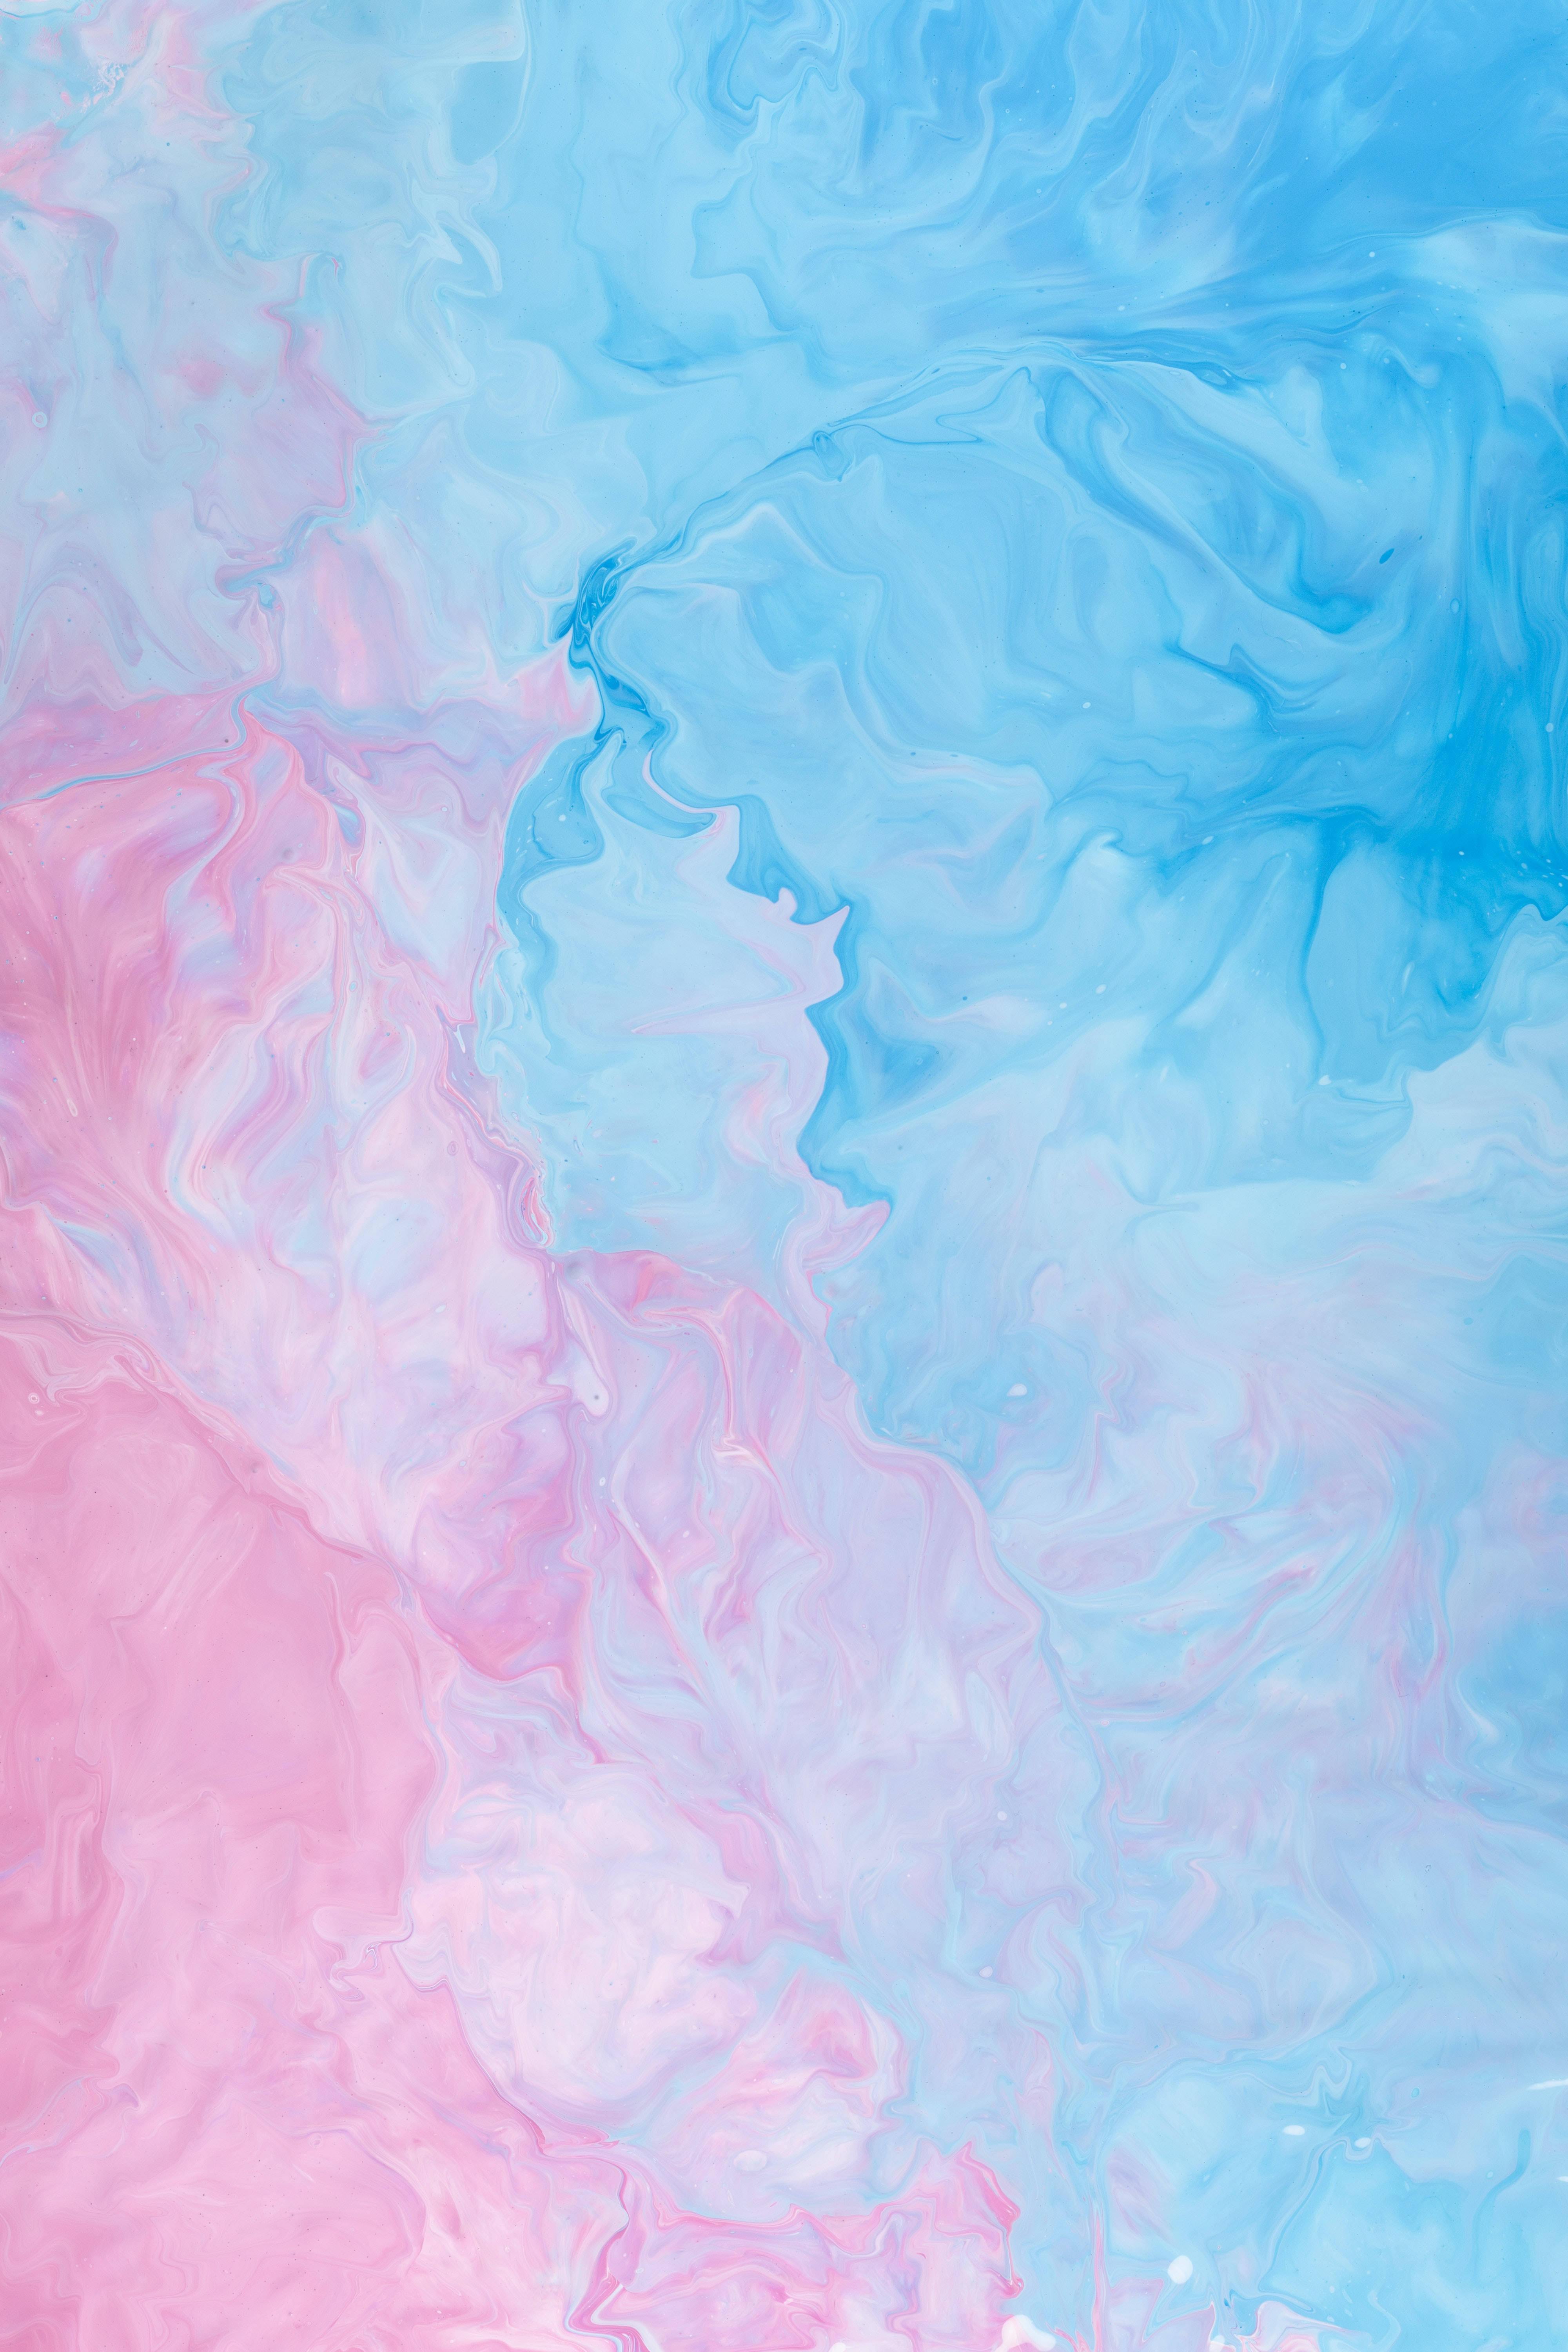 Heavenly Blend of Pink and Blue Marble Texture in 4K Wallpaper